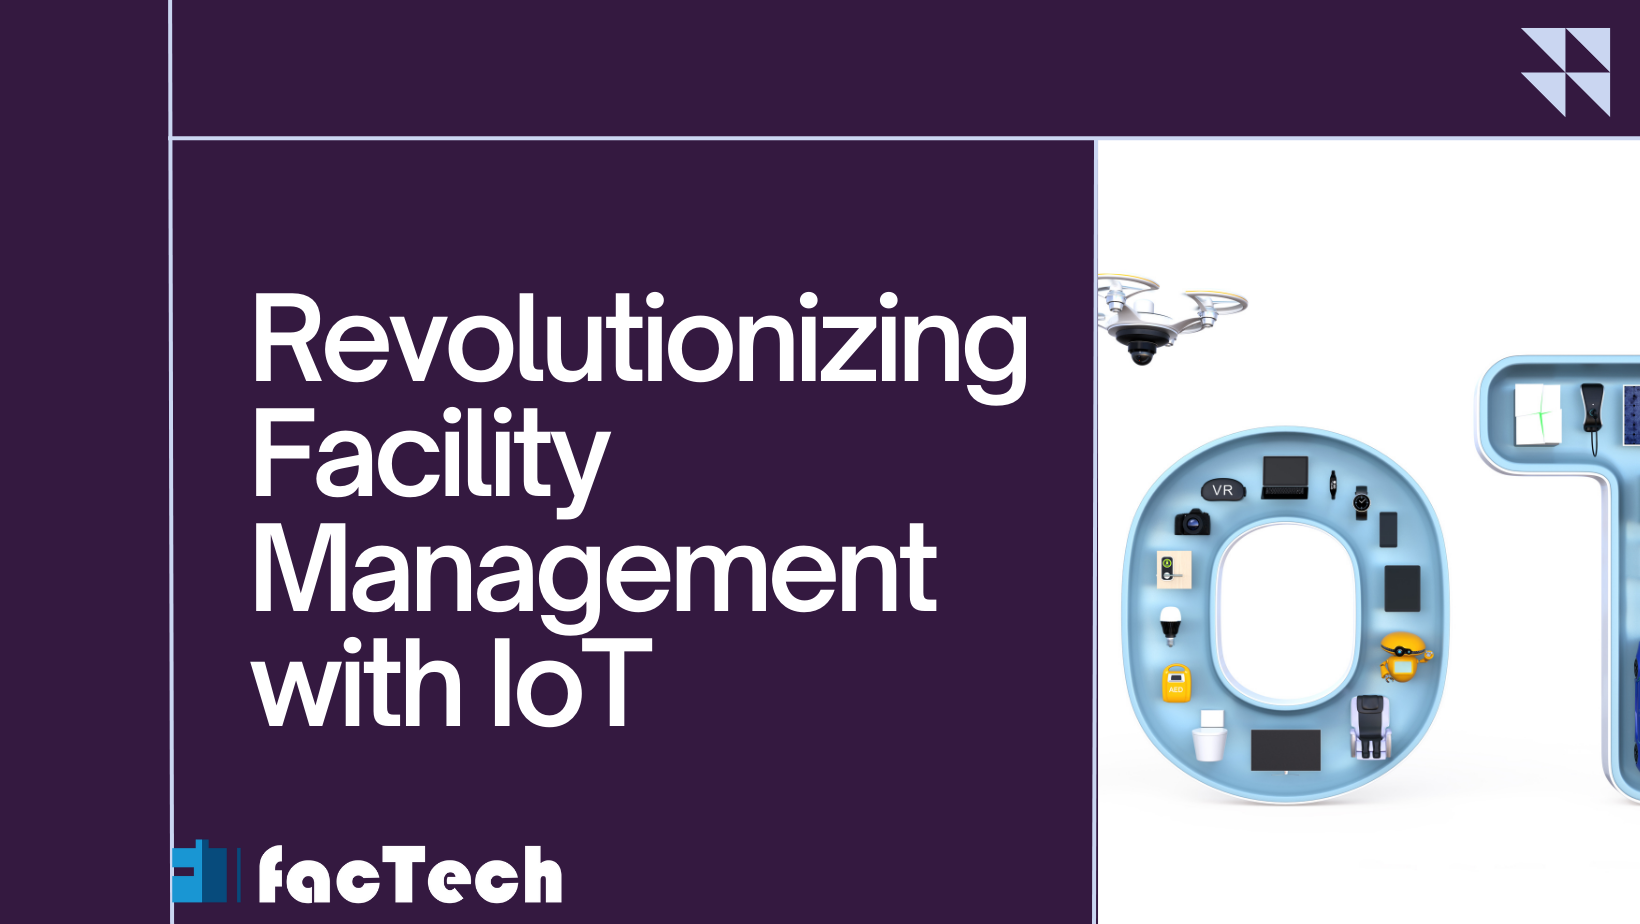 Revolutionizing Facility Management with IoT